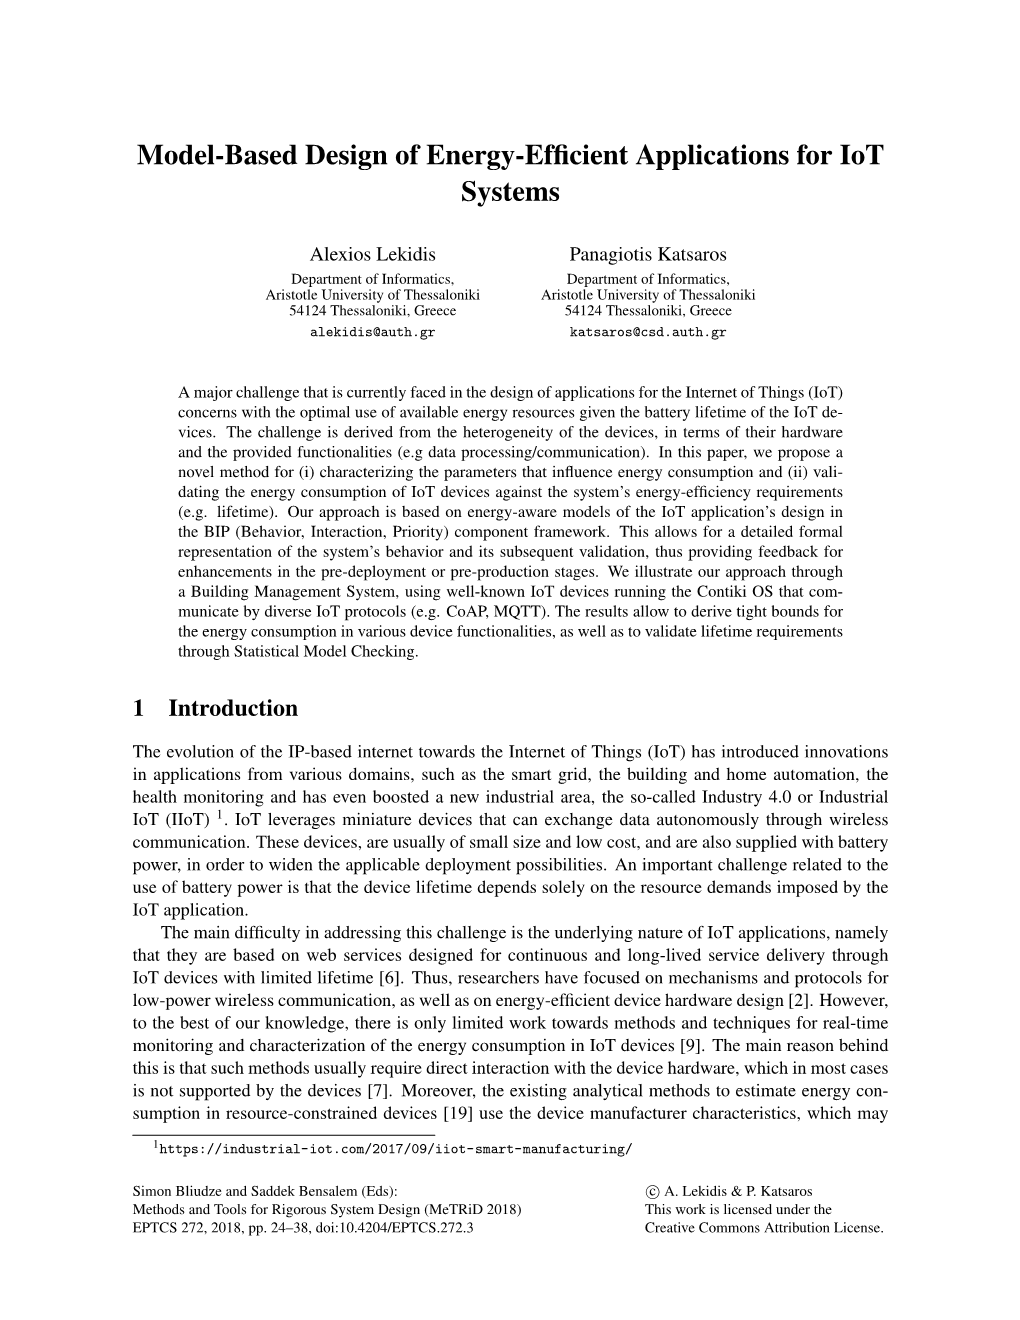 Model-Based Design of Energy-Efficient Applications for Iot Systems